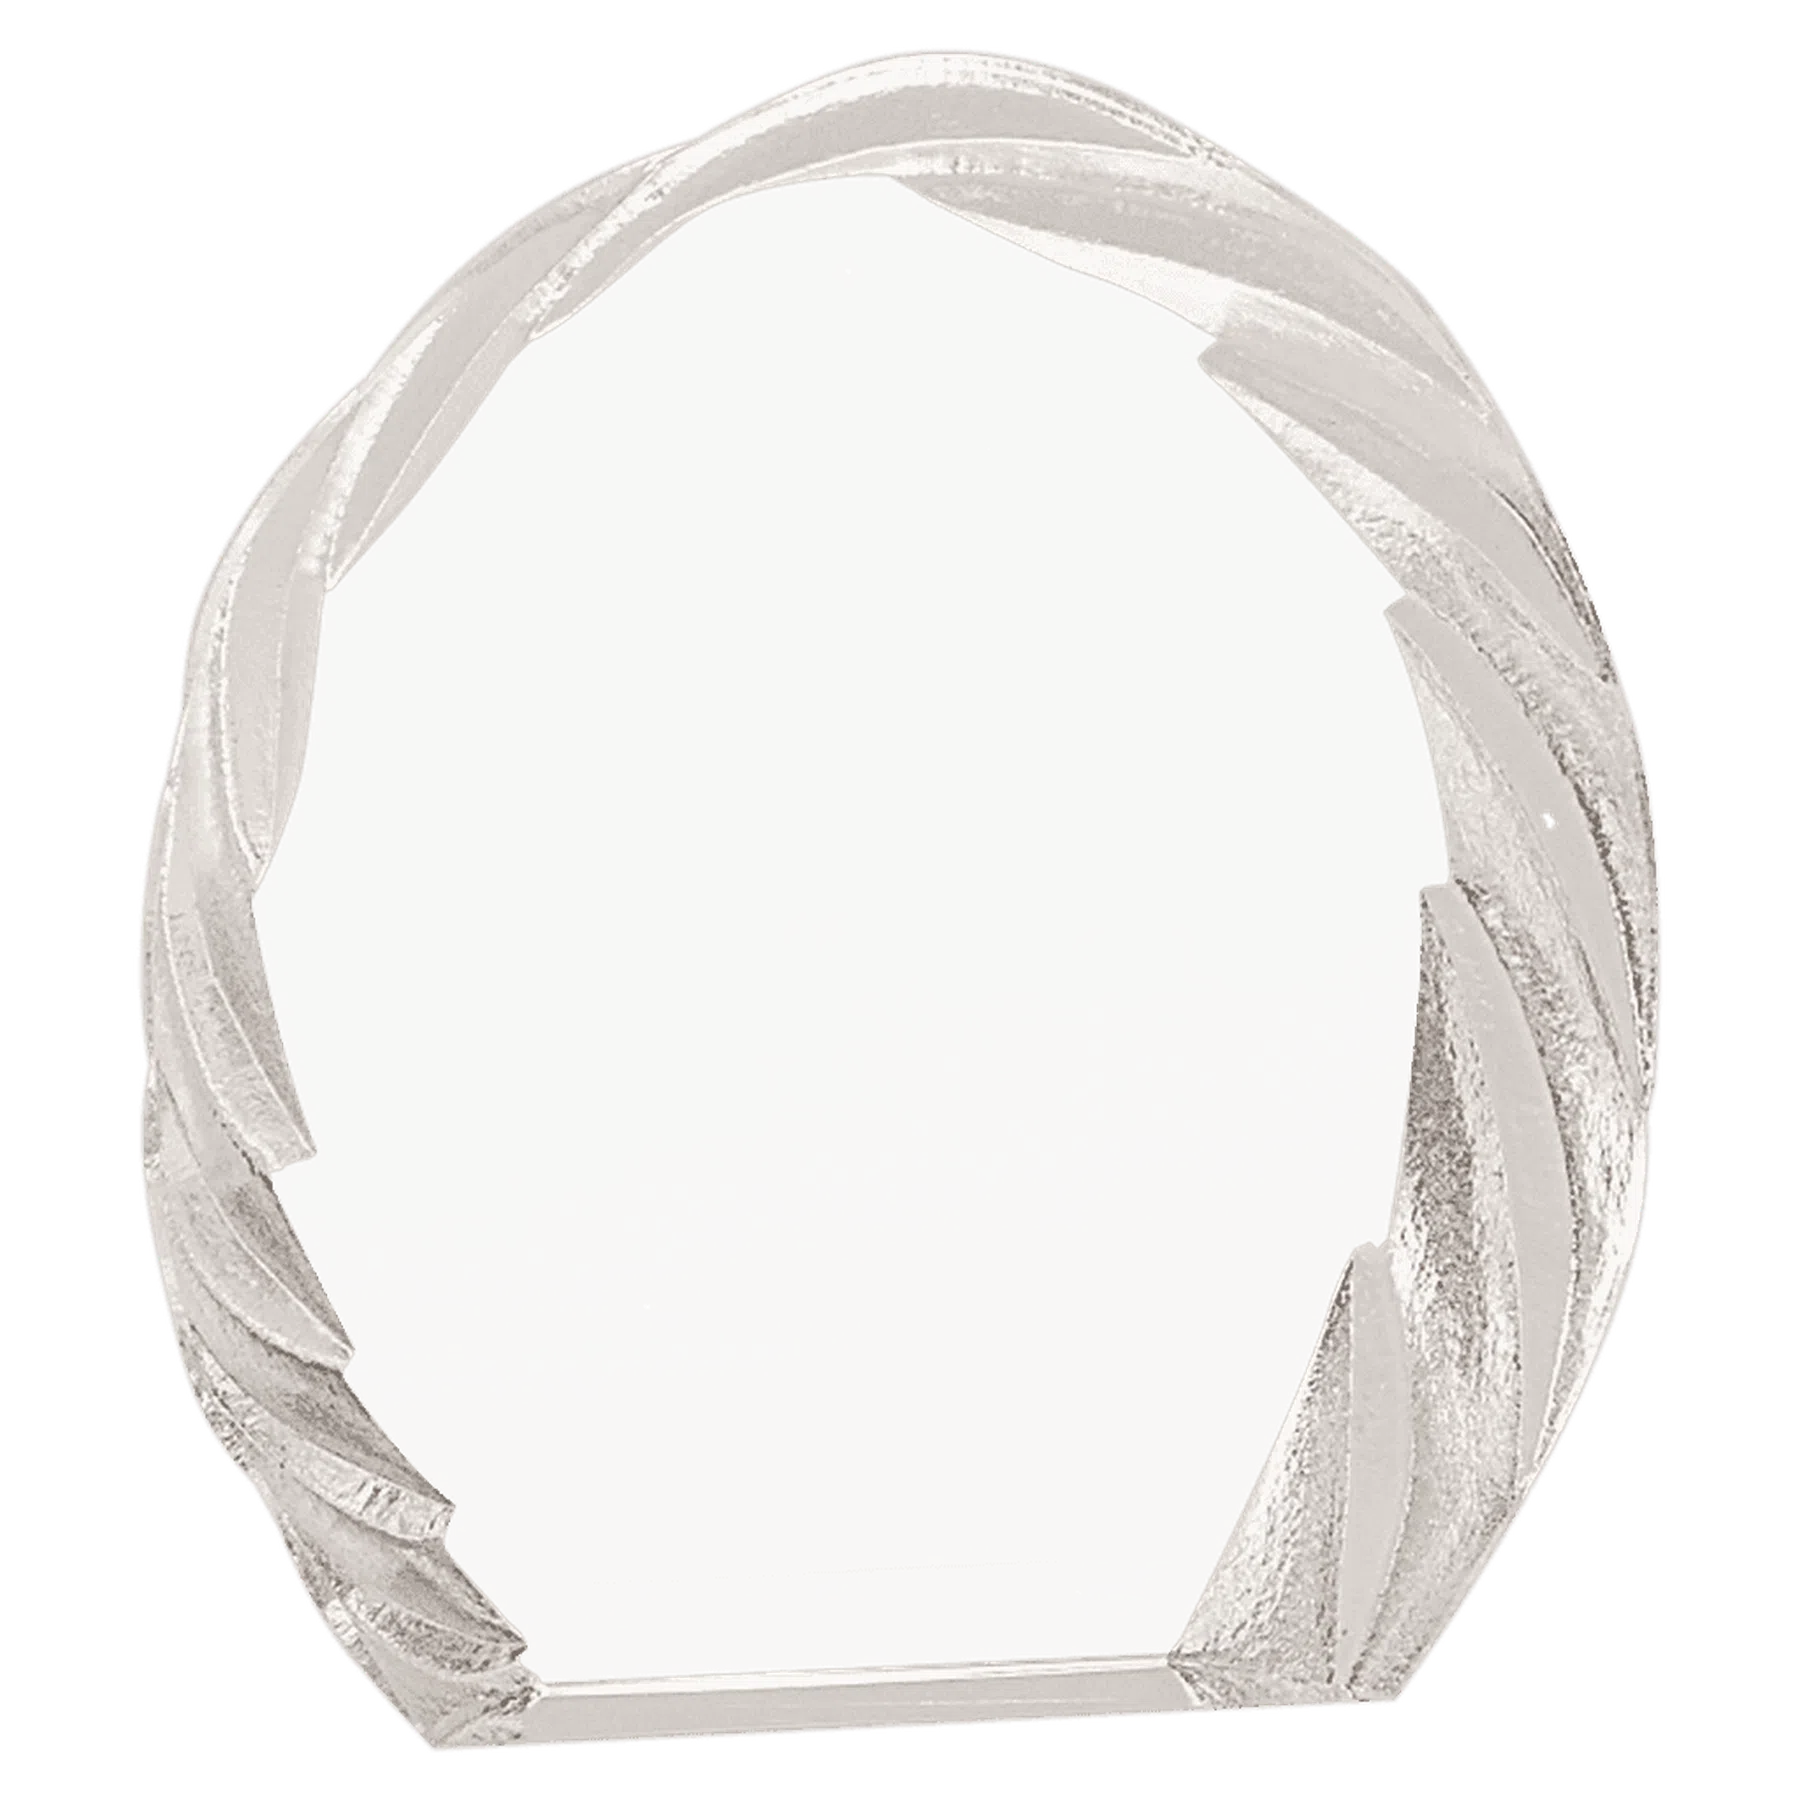 Premier Oval Crystal with Decorative Edge